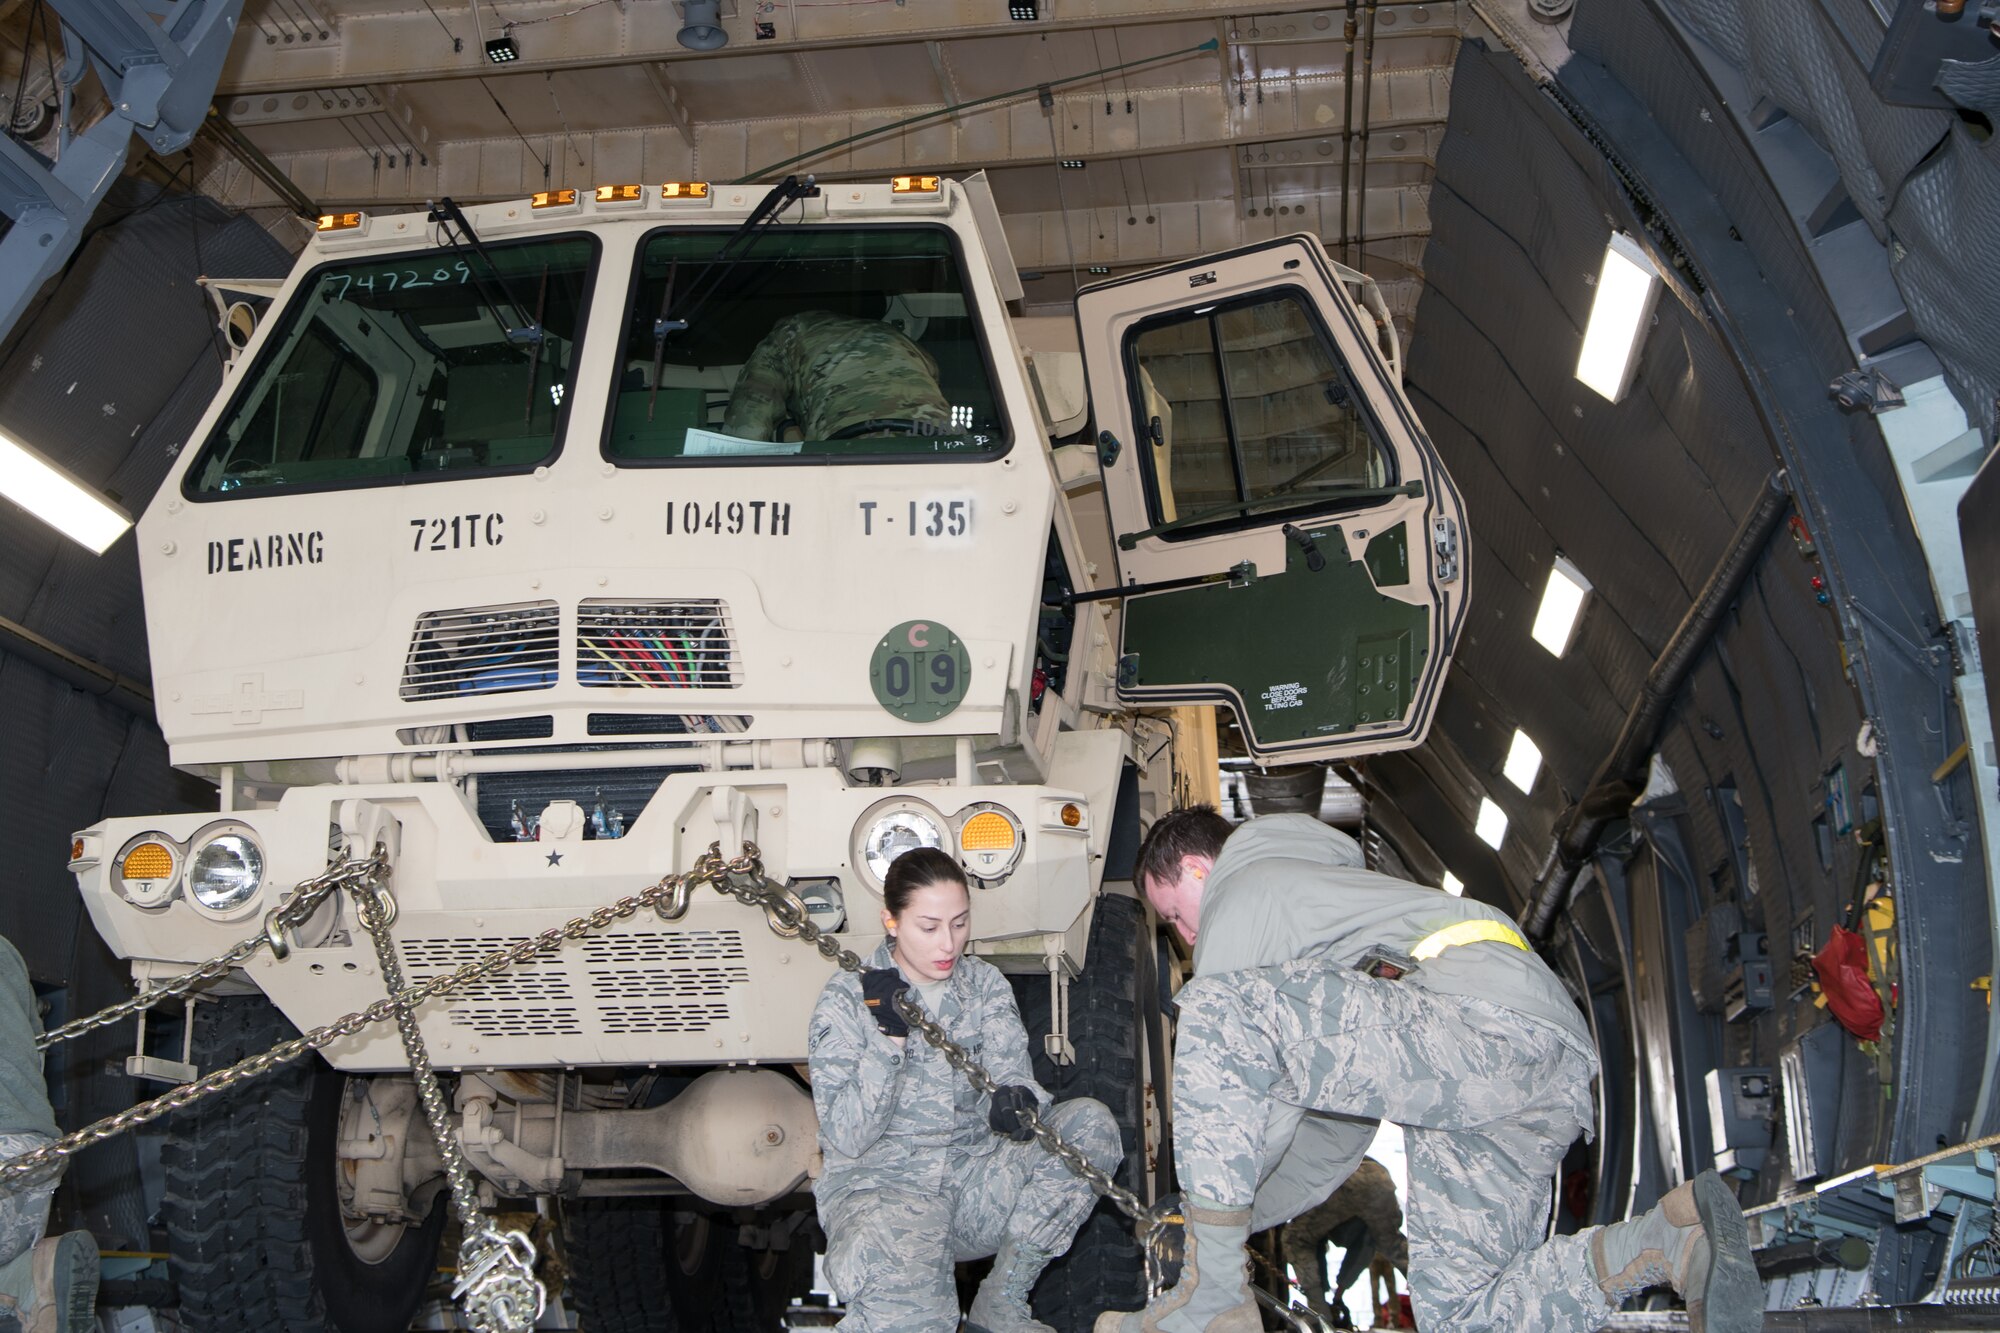 Airmen of the 436th Aerial Port Squadron load and secure vehicles onto a C-5M Super Galaxy during the Dover Operational Readiness for a Multi-domain Agile Response Exercise Nov. 14, 2019, at Dover Air Force Base, Del. Vehicles and personnel from the 72nd Troop Command in New Castle, Del., were used to simulate a mass troop deployment. (U.S. Air Force photo by Mauricio Campino)